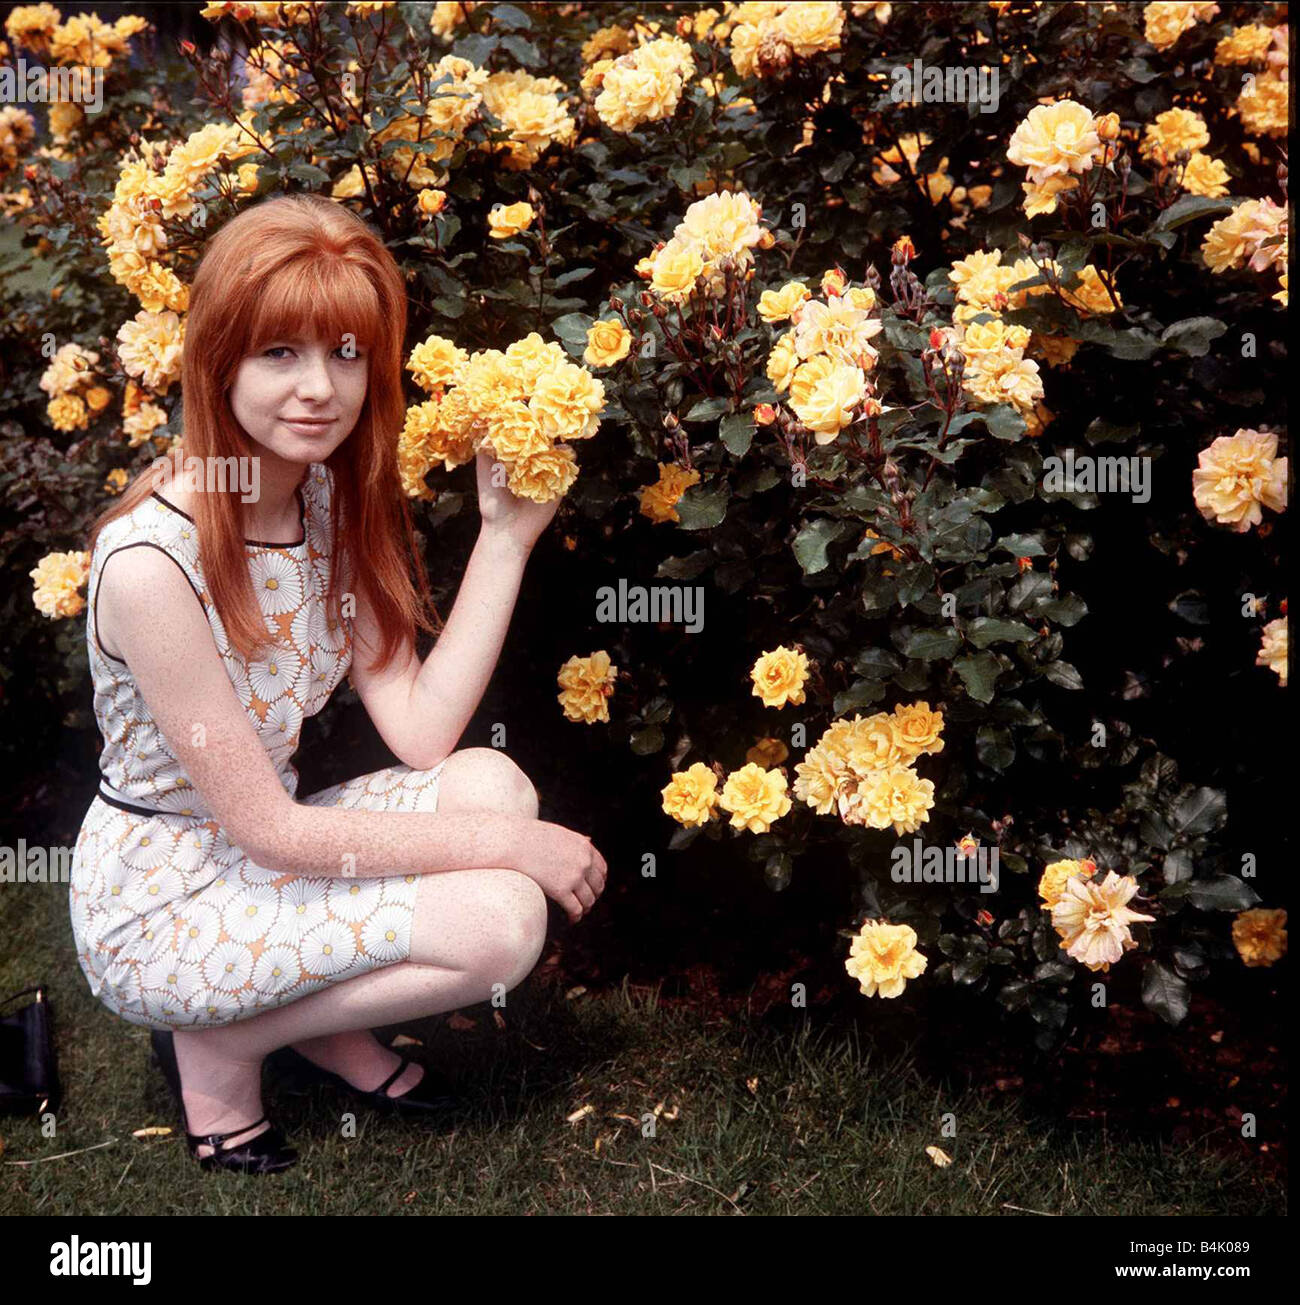 Singer actress and model Jane Asher Stock Photo - Alamy